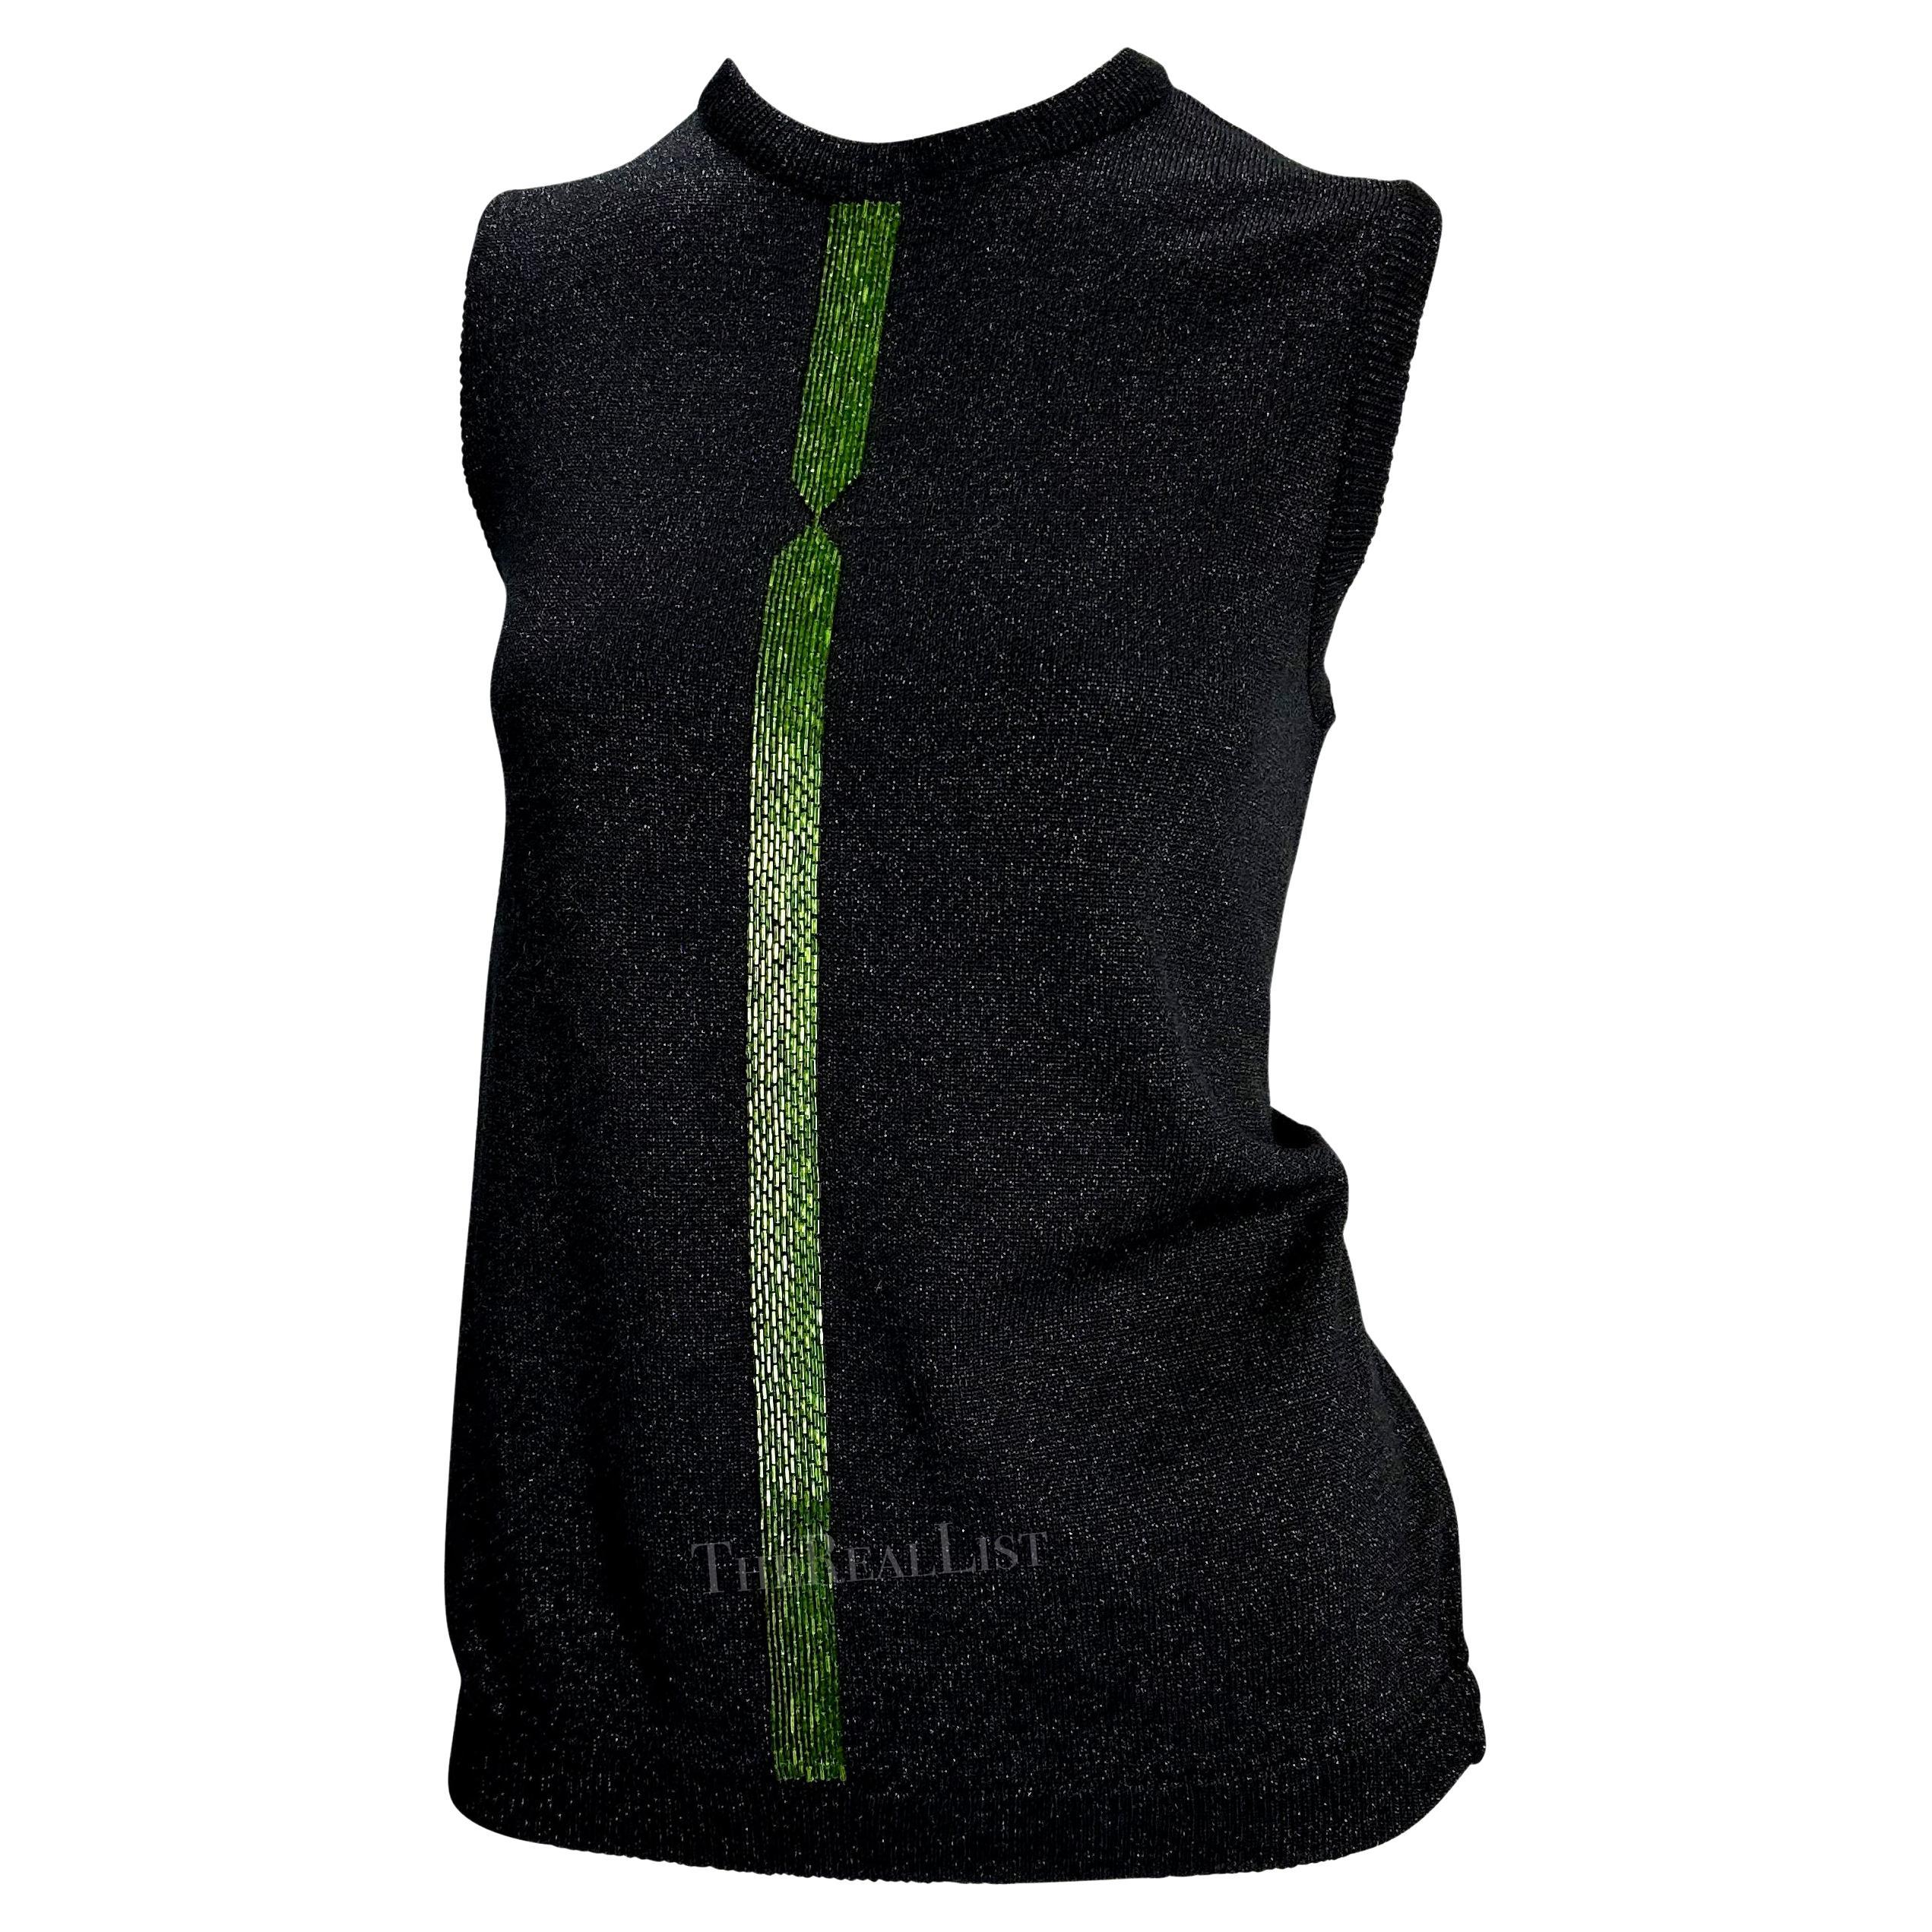 Presenting a fabulous dark grey Gianni Versace beaded sweater vest, designed by Donatella Versace. From the Fall/Winter 1997 collection, this knit sweater features a vibrant green beaded accent down the front of the top. Add this rare piece of